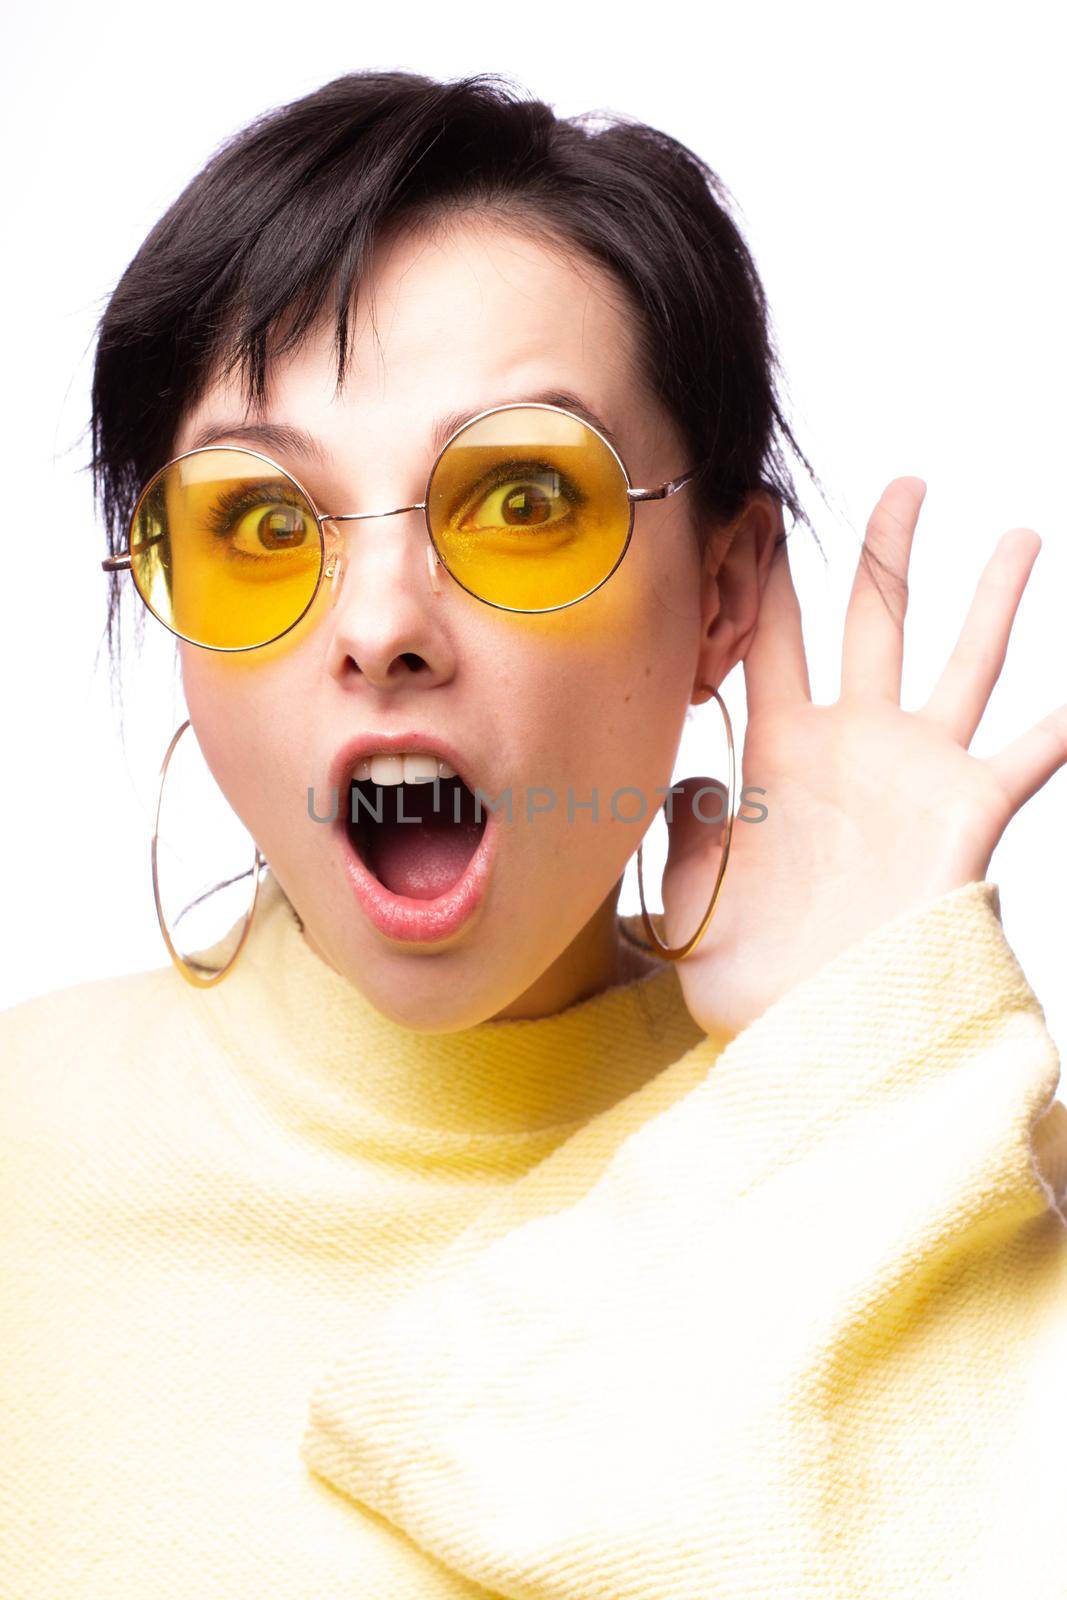 brunette woman in yellow glasses and yellow sweater, close-up portrait. High quality photo